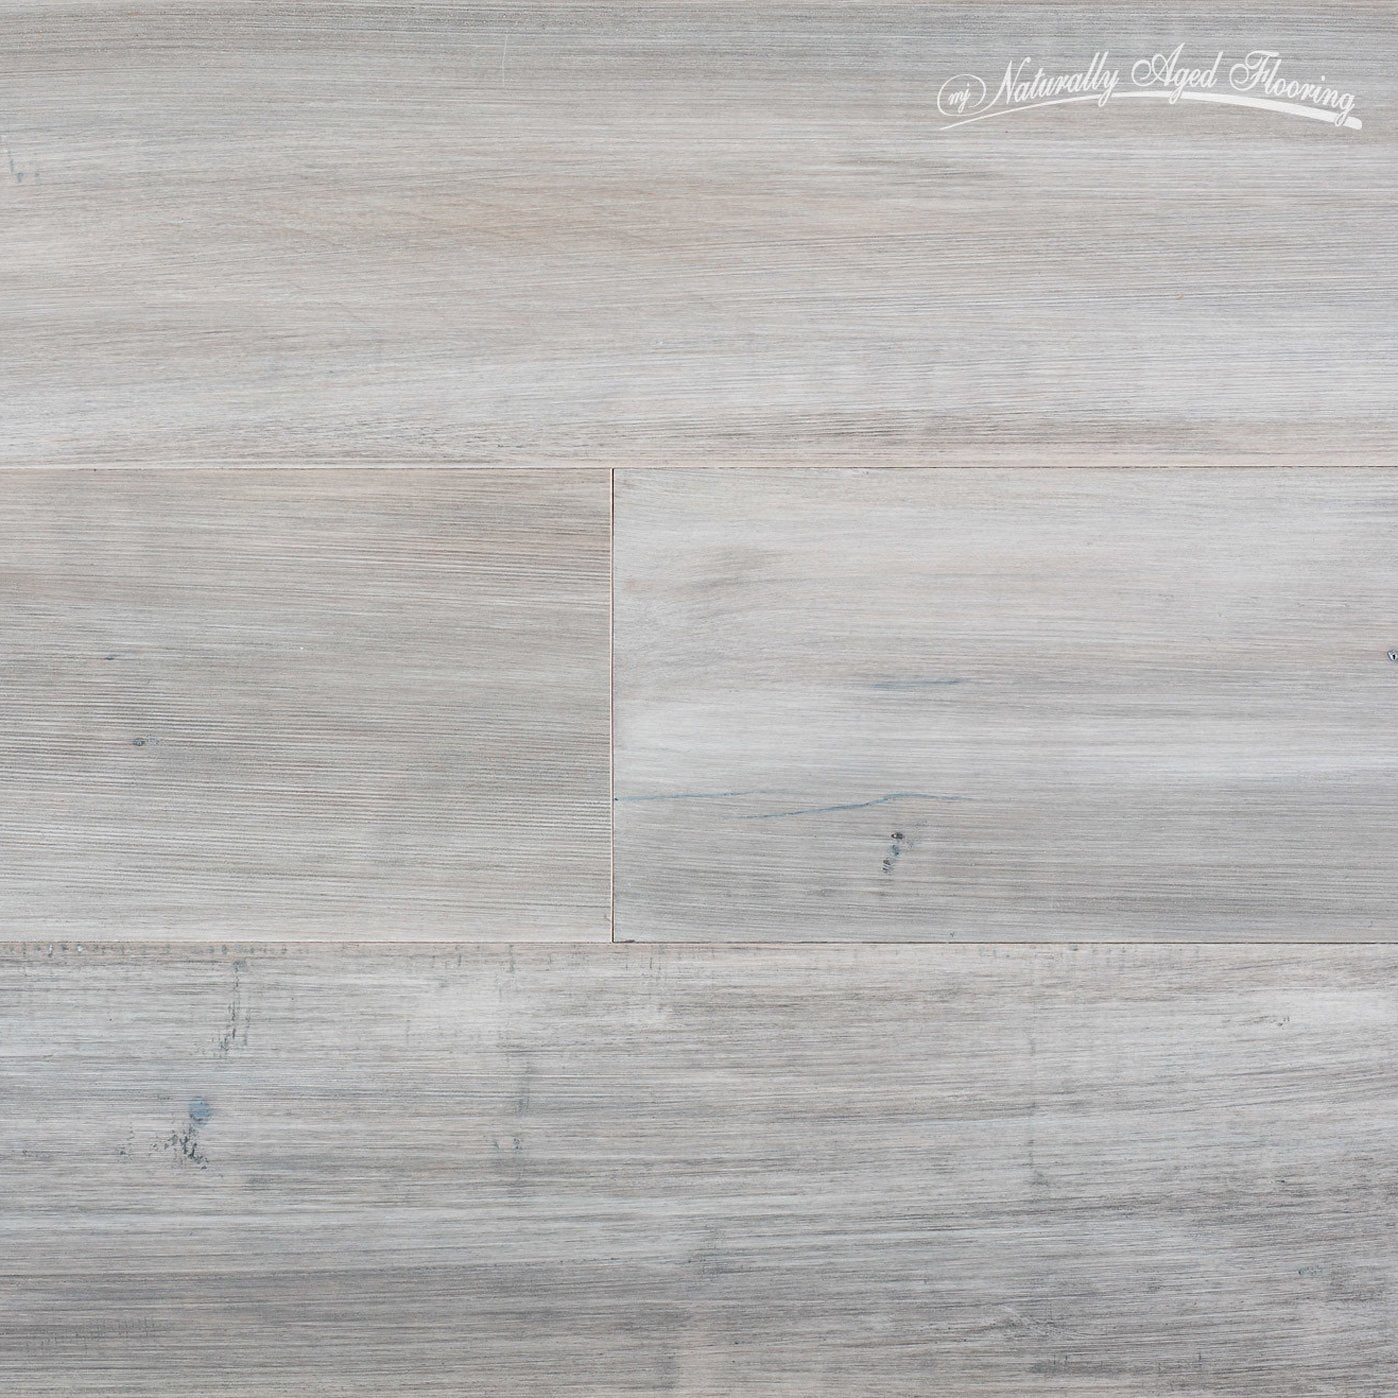 Naturally Aged Flooring - Royal Collection- Hand Scraped Maple Engineered Hardwood - Glacier